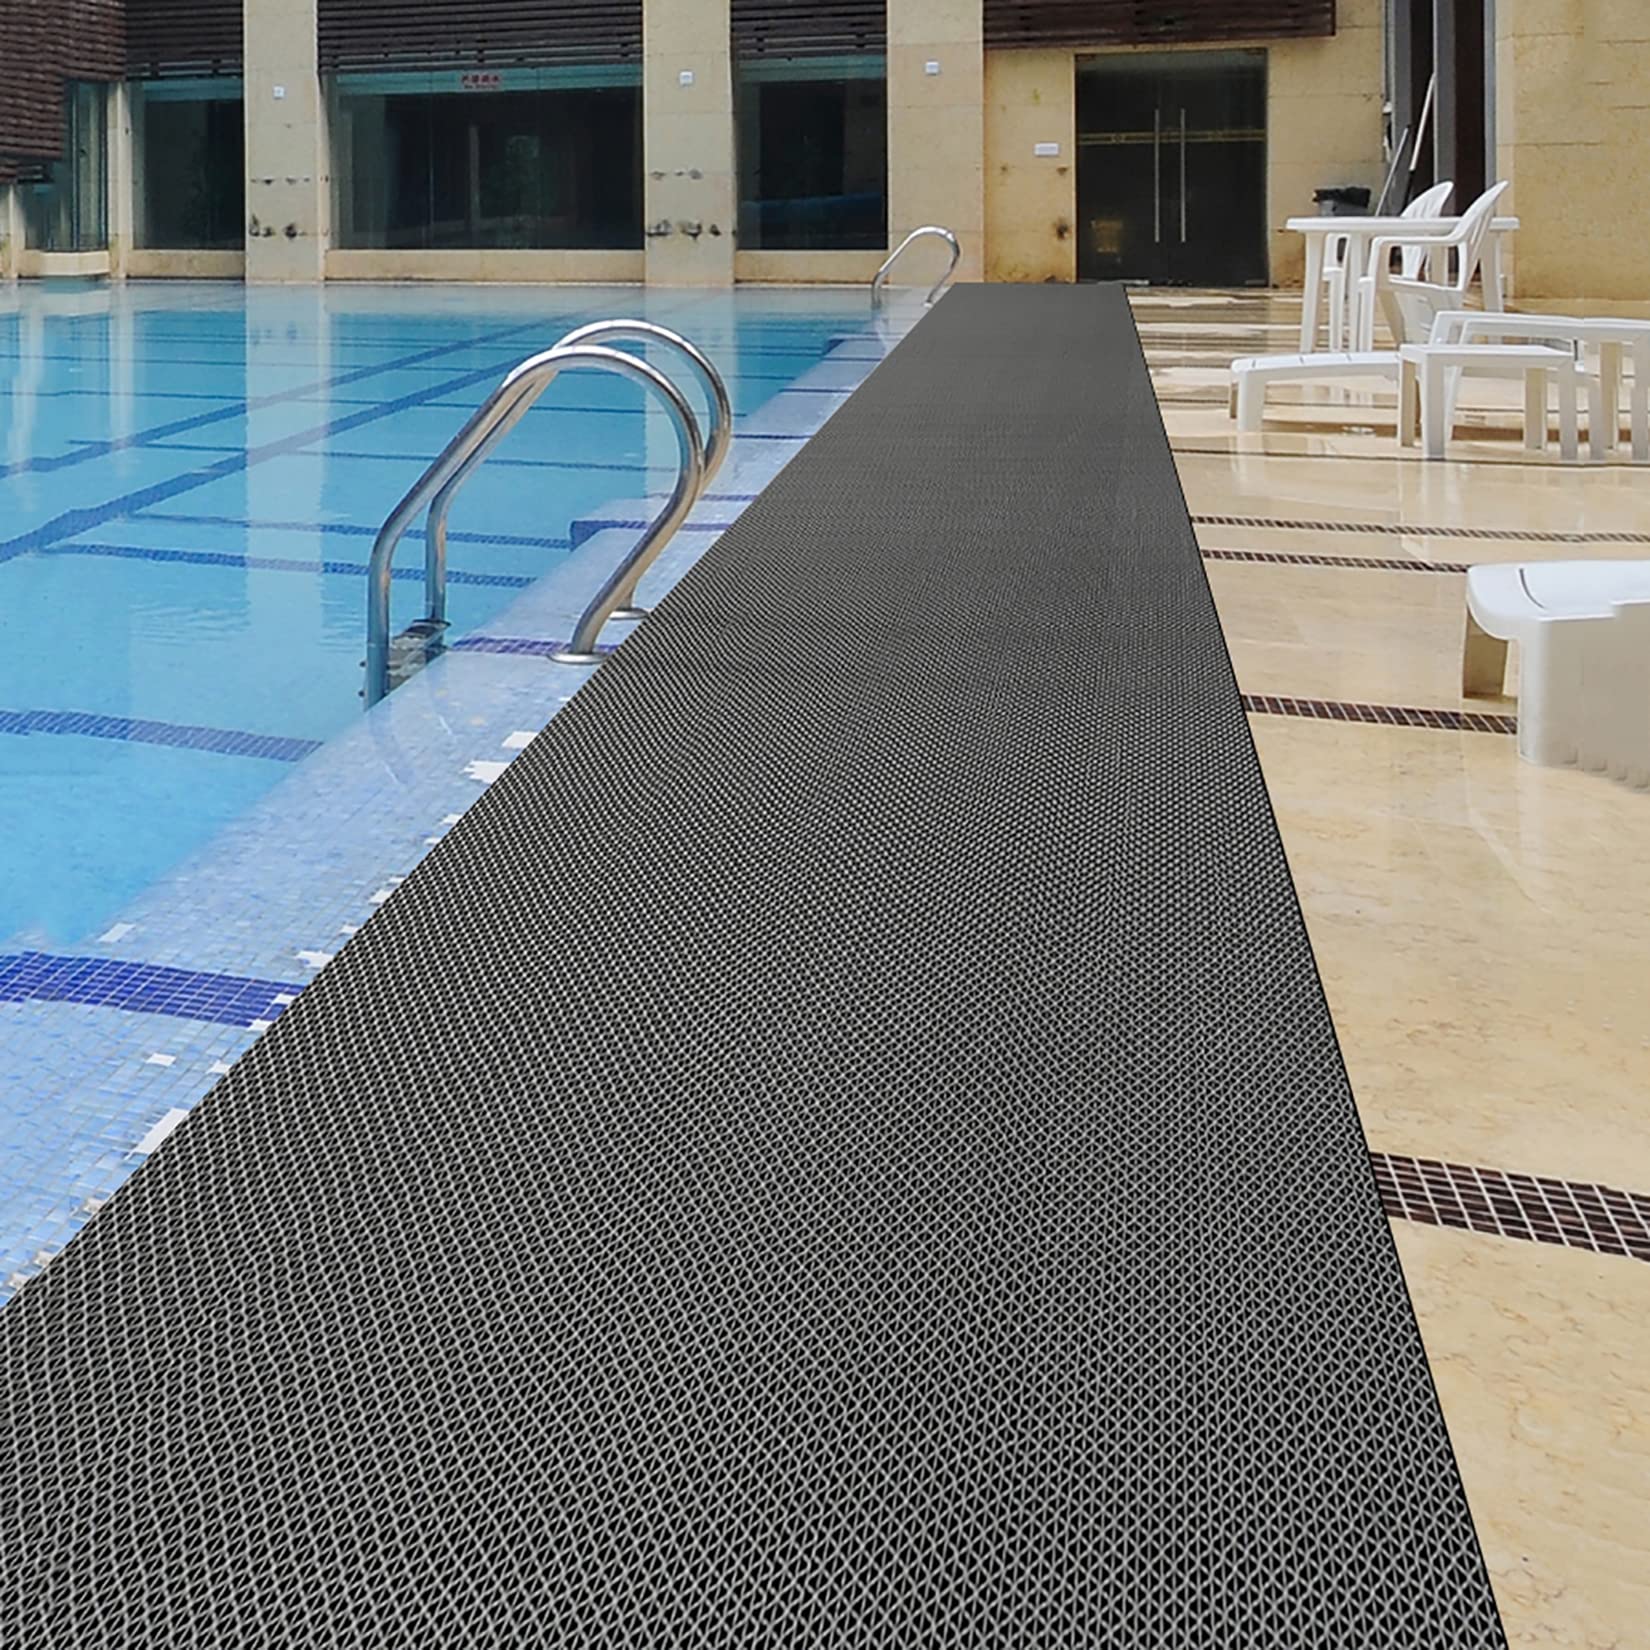 Anti-Slip Mats for Pool Areas and Locker Rooms | Safety Grid | | NoTrax